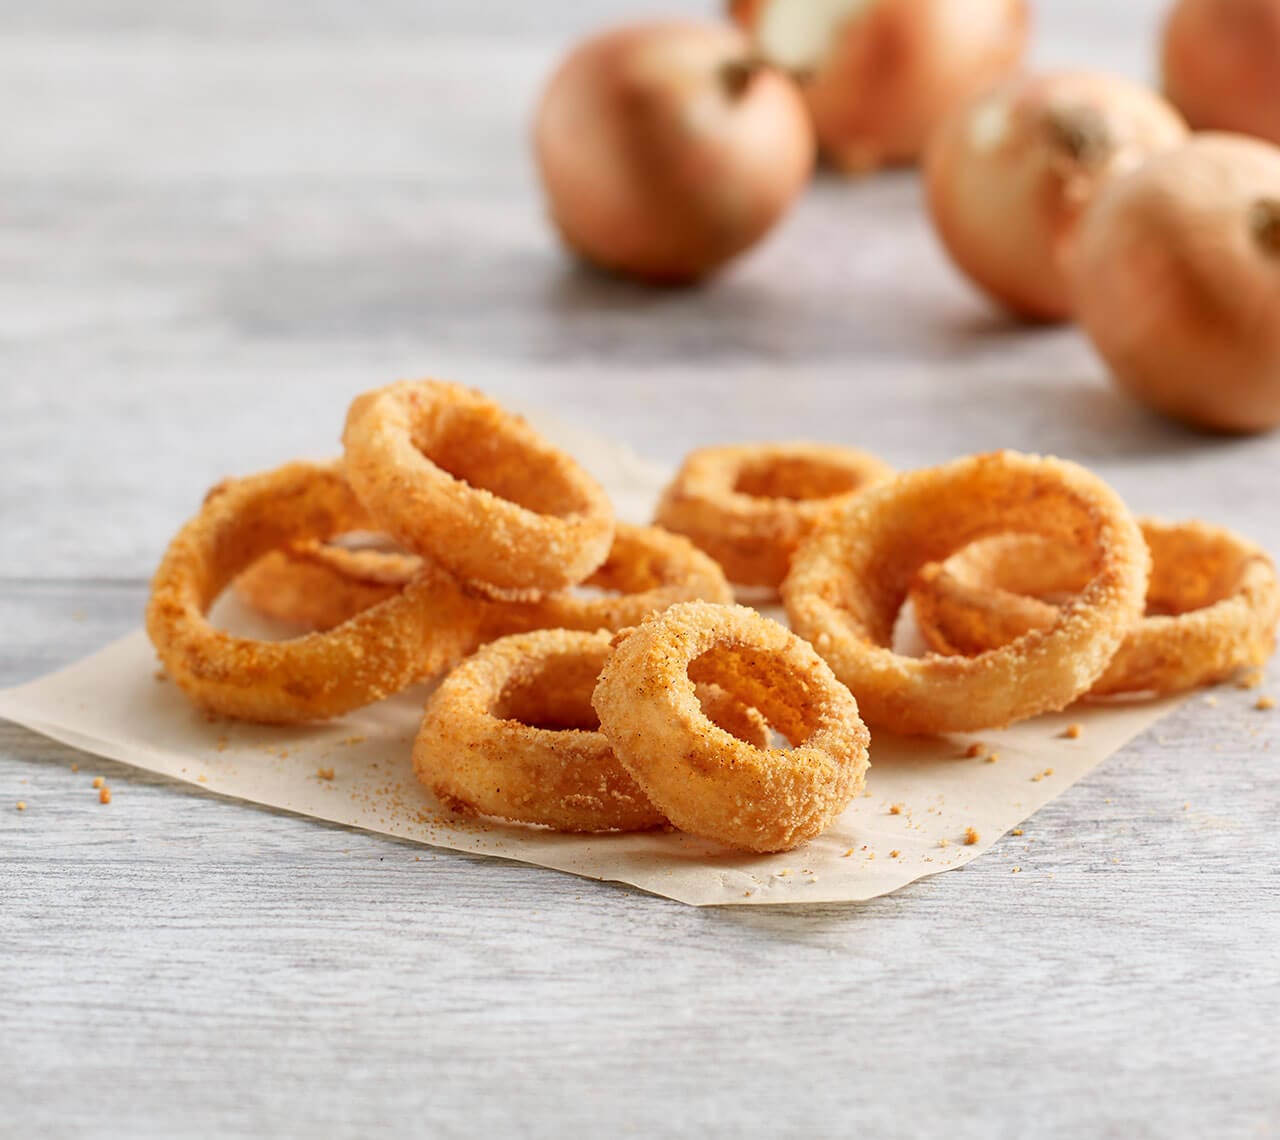 Onion rings from A&W